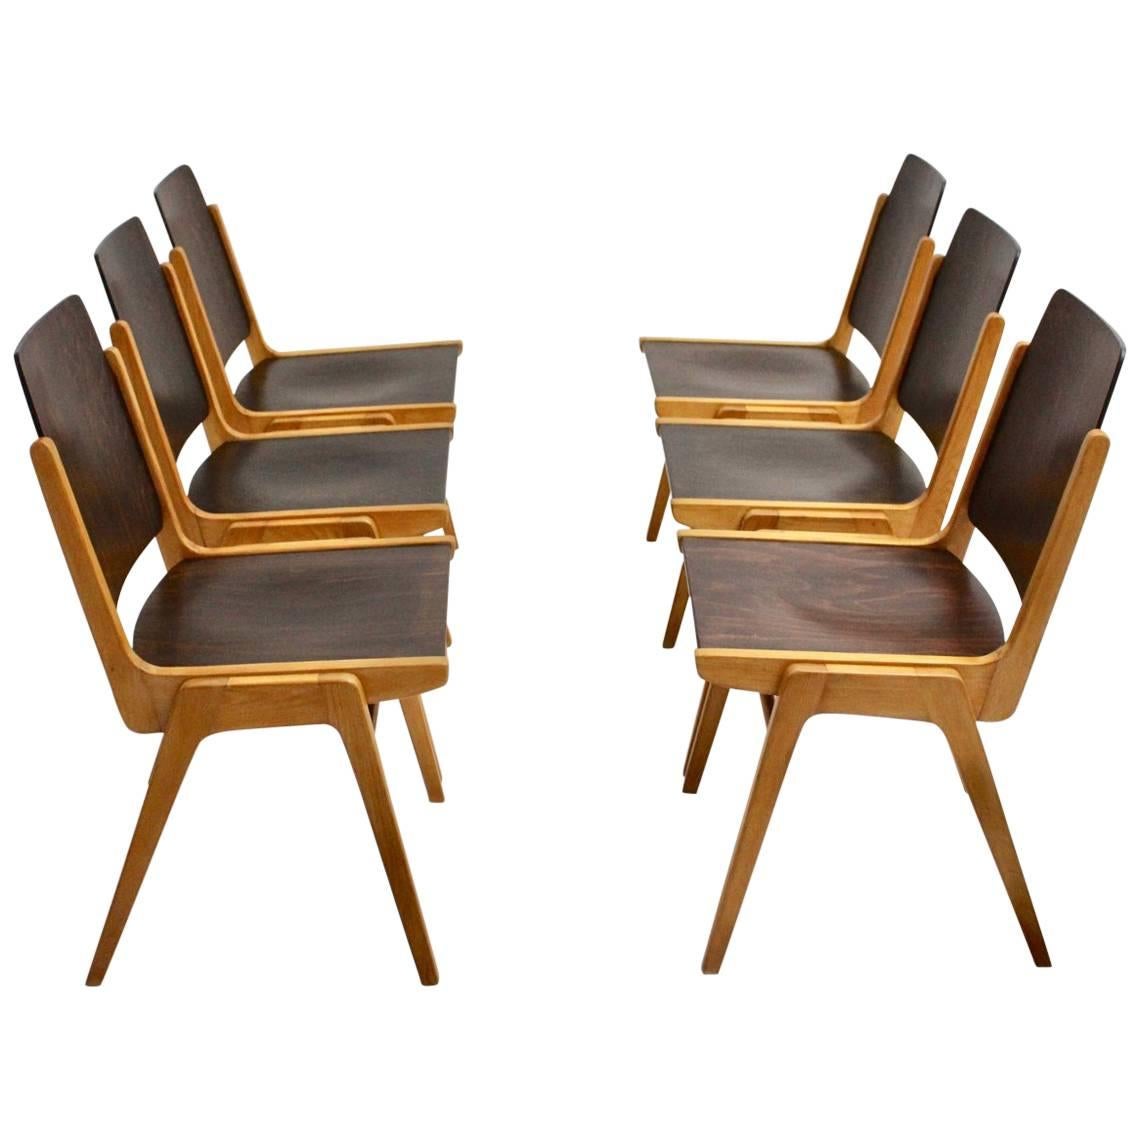 Midcentury Brown Beech Dining Room Chairs Franz Schuster Vienna 1959, Set of Six